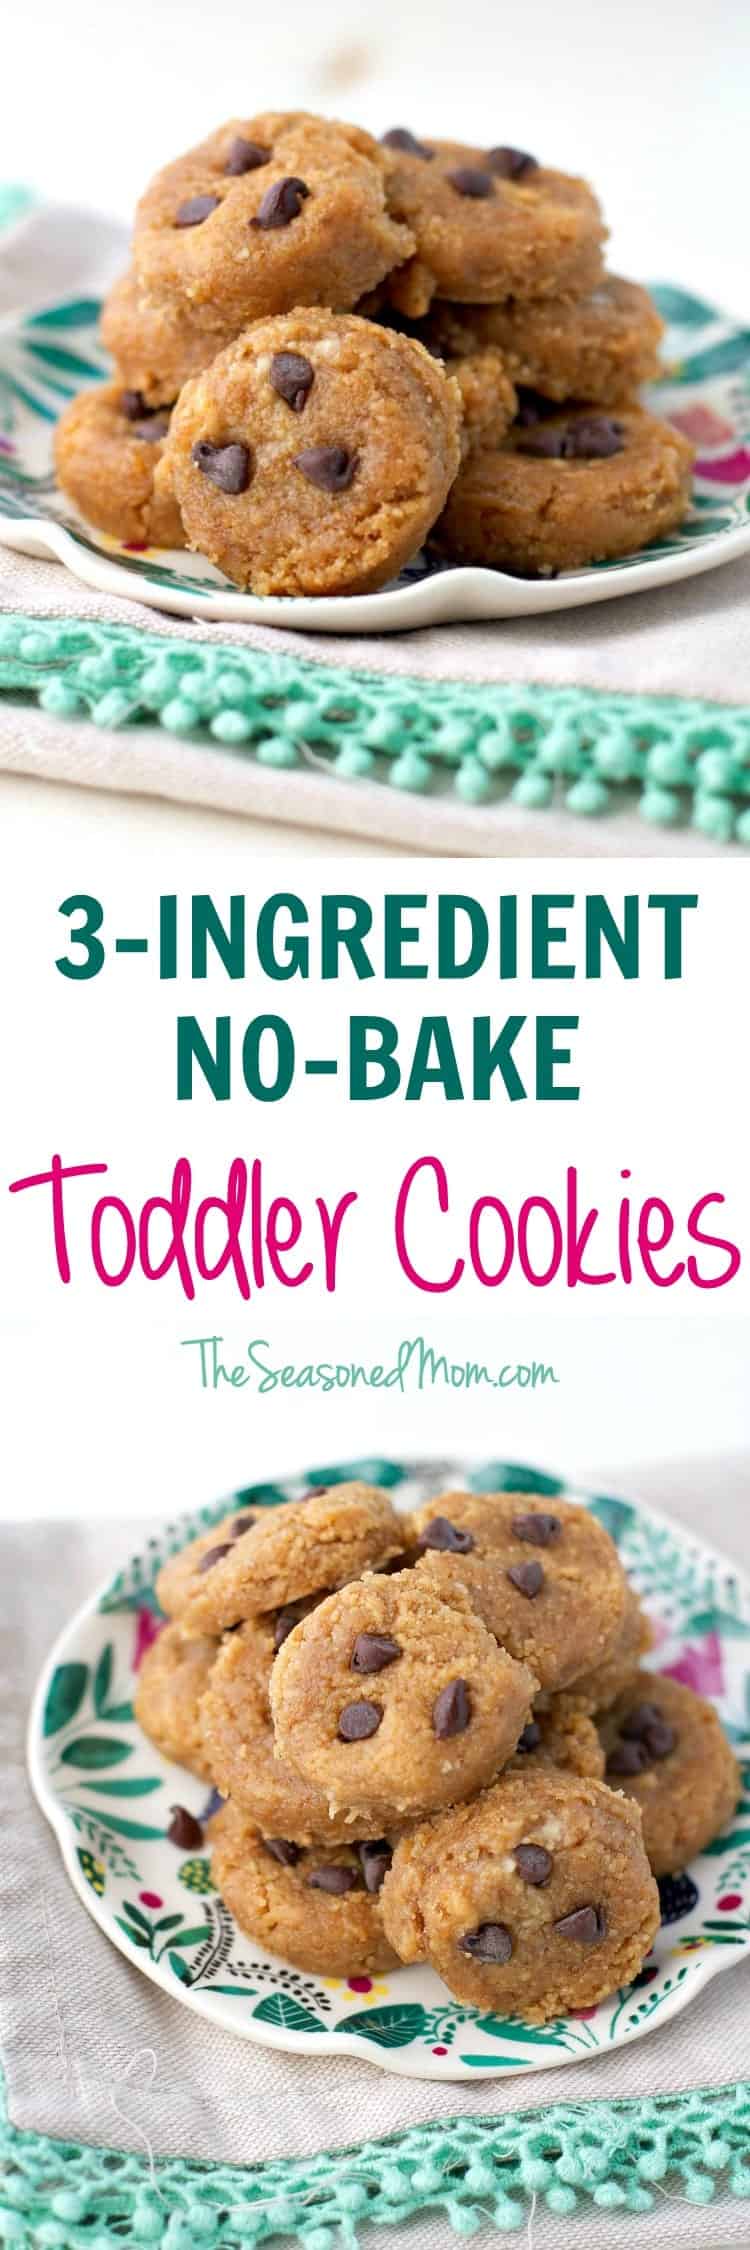 With just graham crackers, banana, and peanut butter, these 3-Ingredient No Bake Toddler Cookies are a perfect make-ahead option for lunch boxes, picnics, and summer travel.